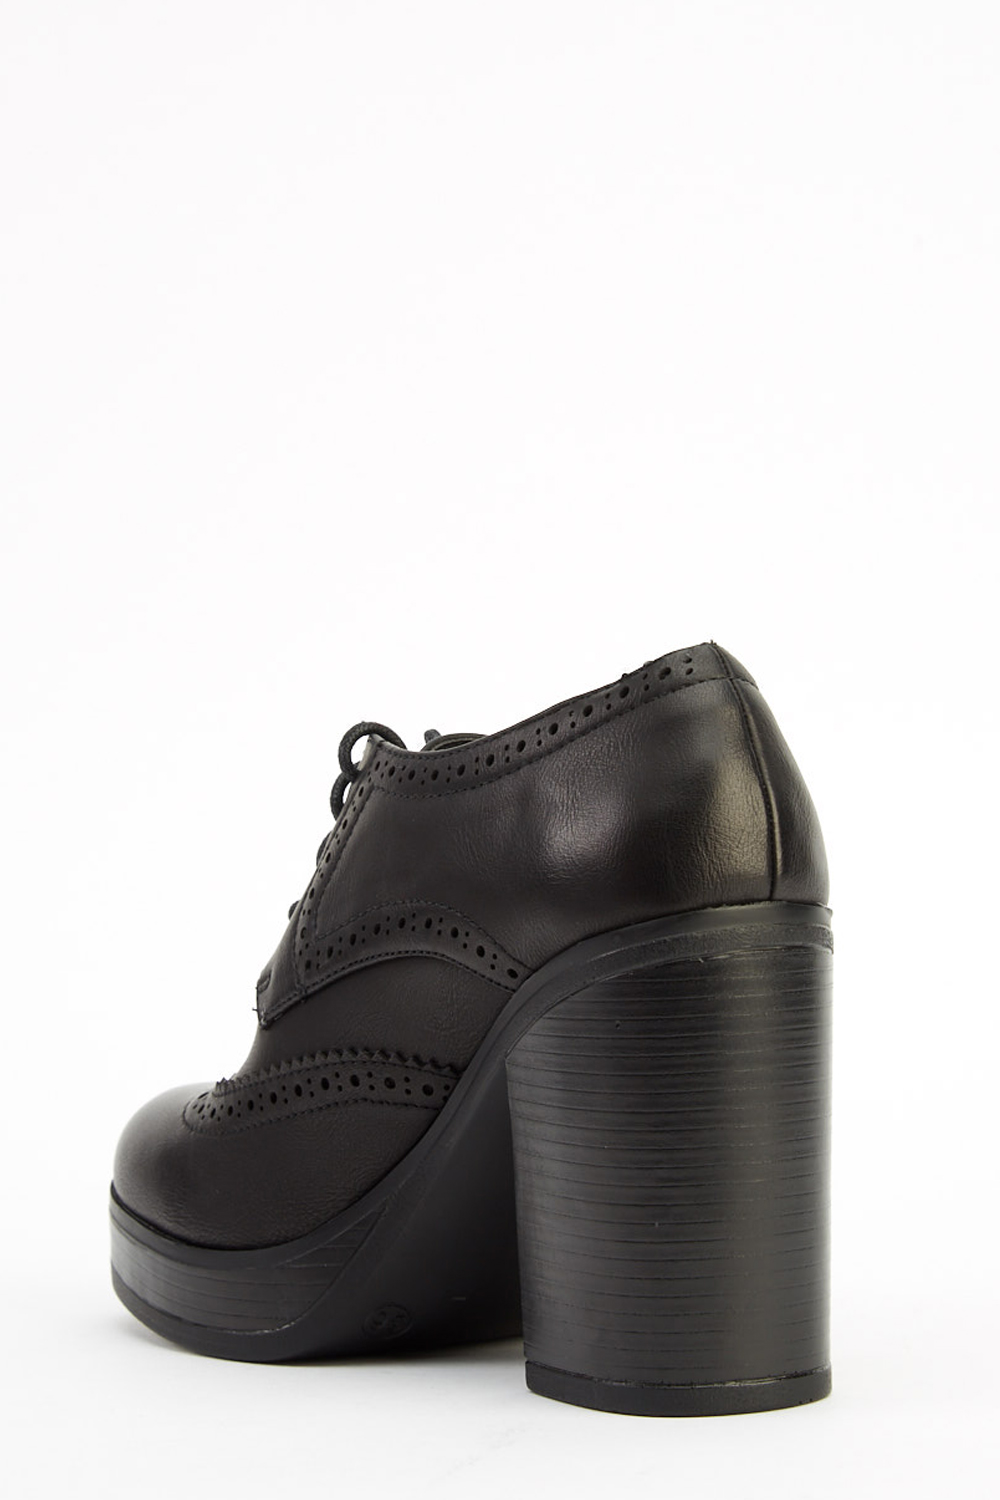 block heel lace up shoes